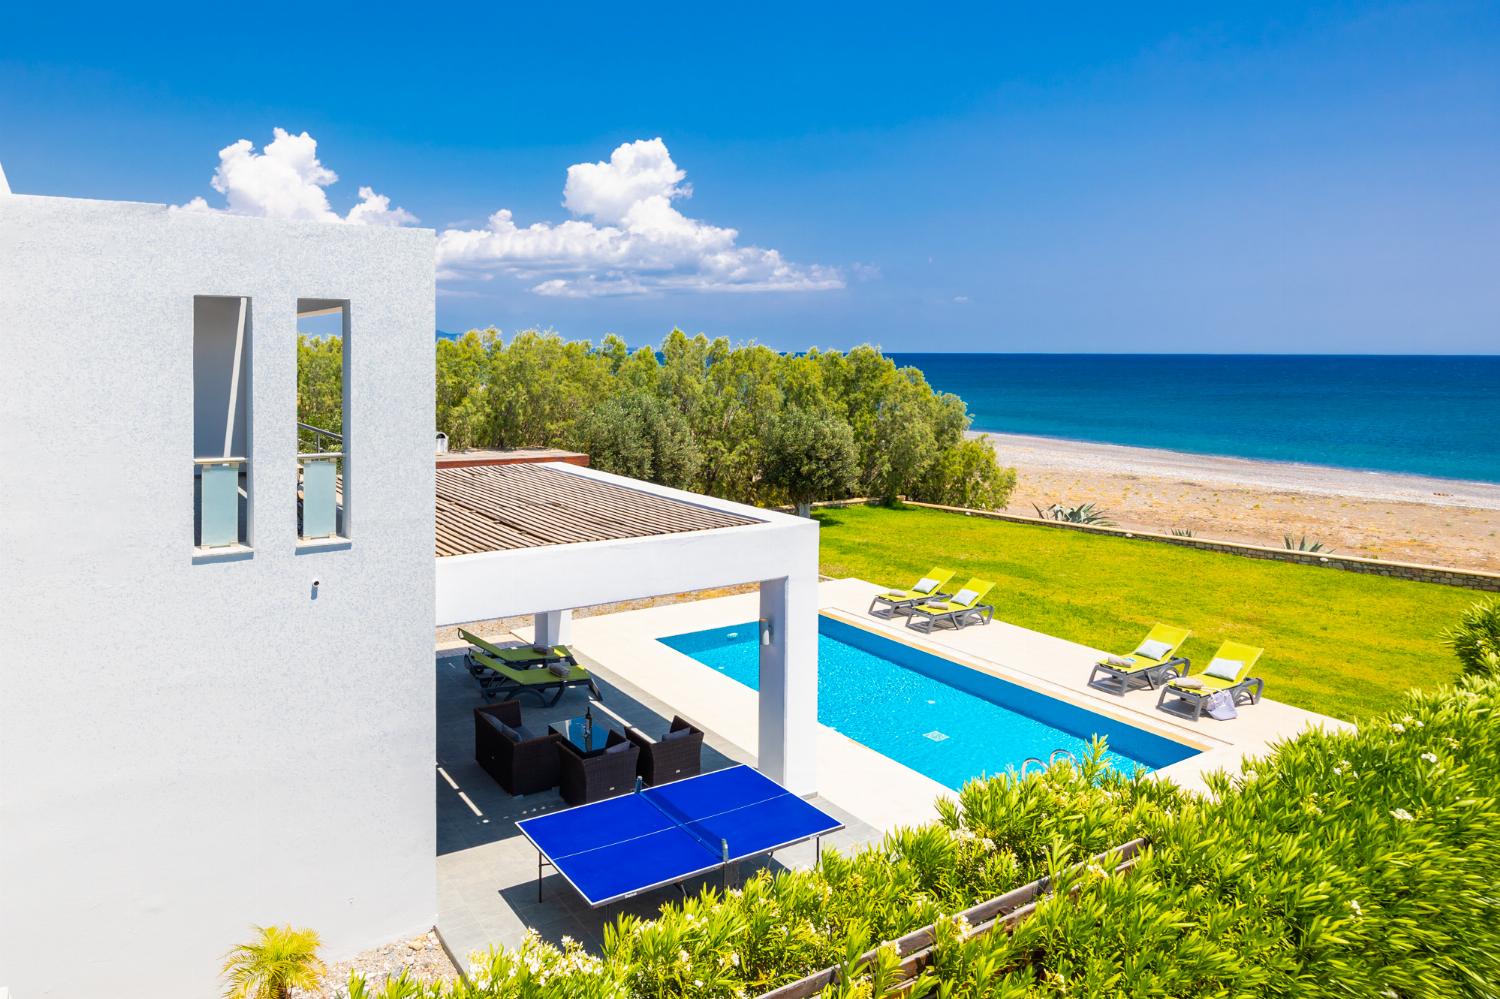 ,Beautiful villa with private pool, terrace, and garden with sea views